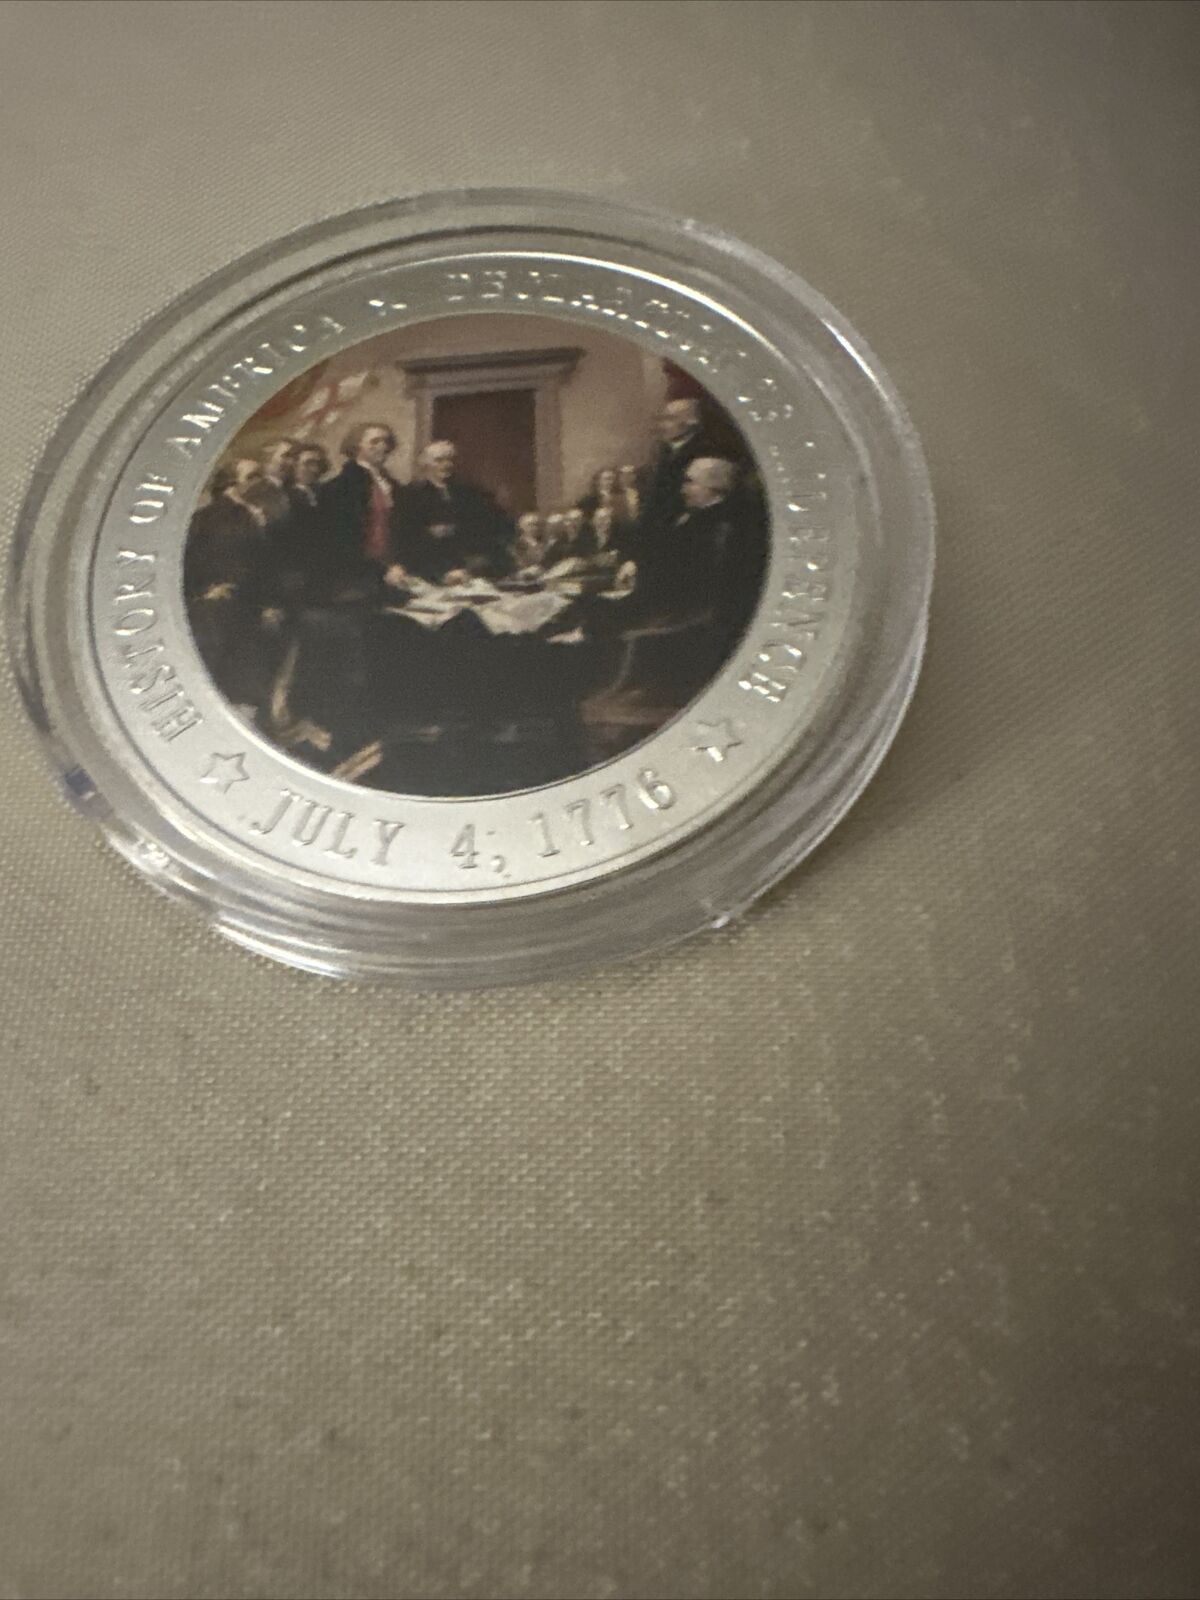 Commerative Coin Presidents Day 1776 US Declaration of Independence